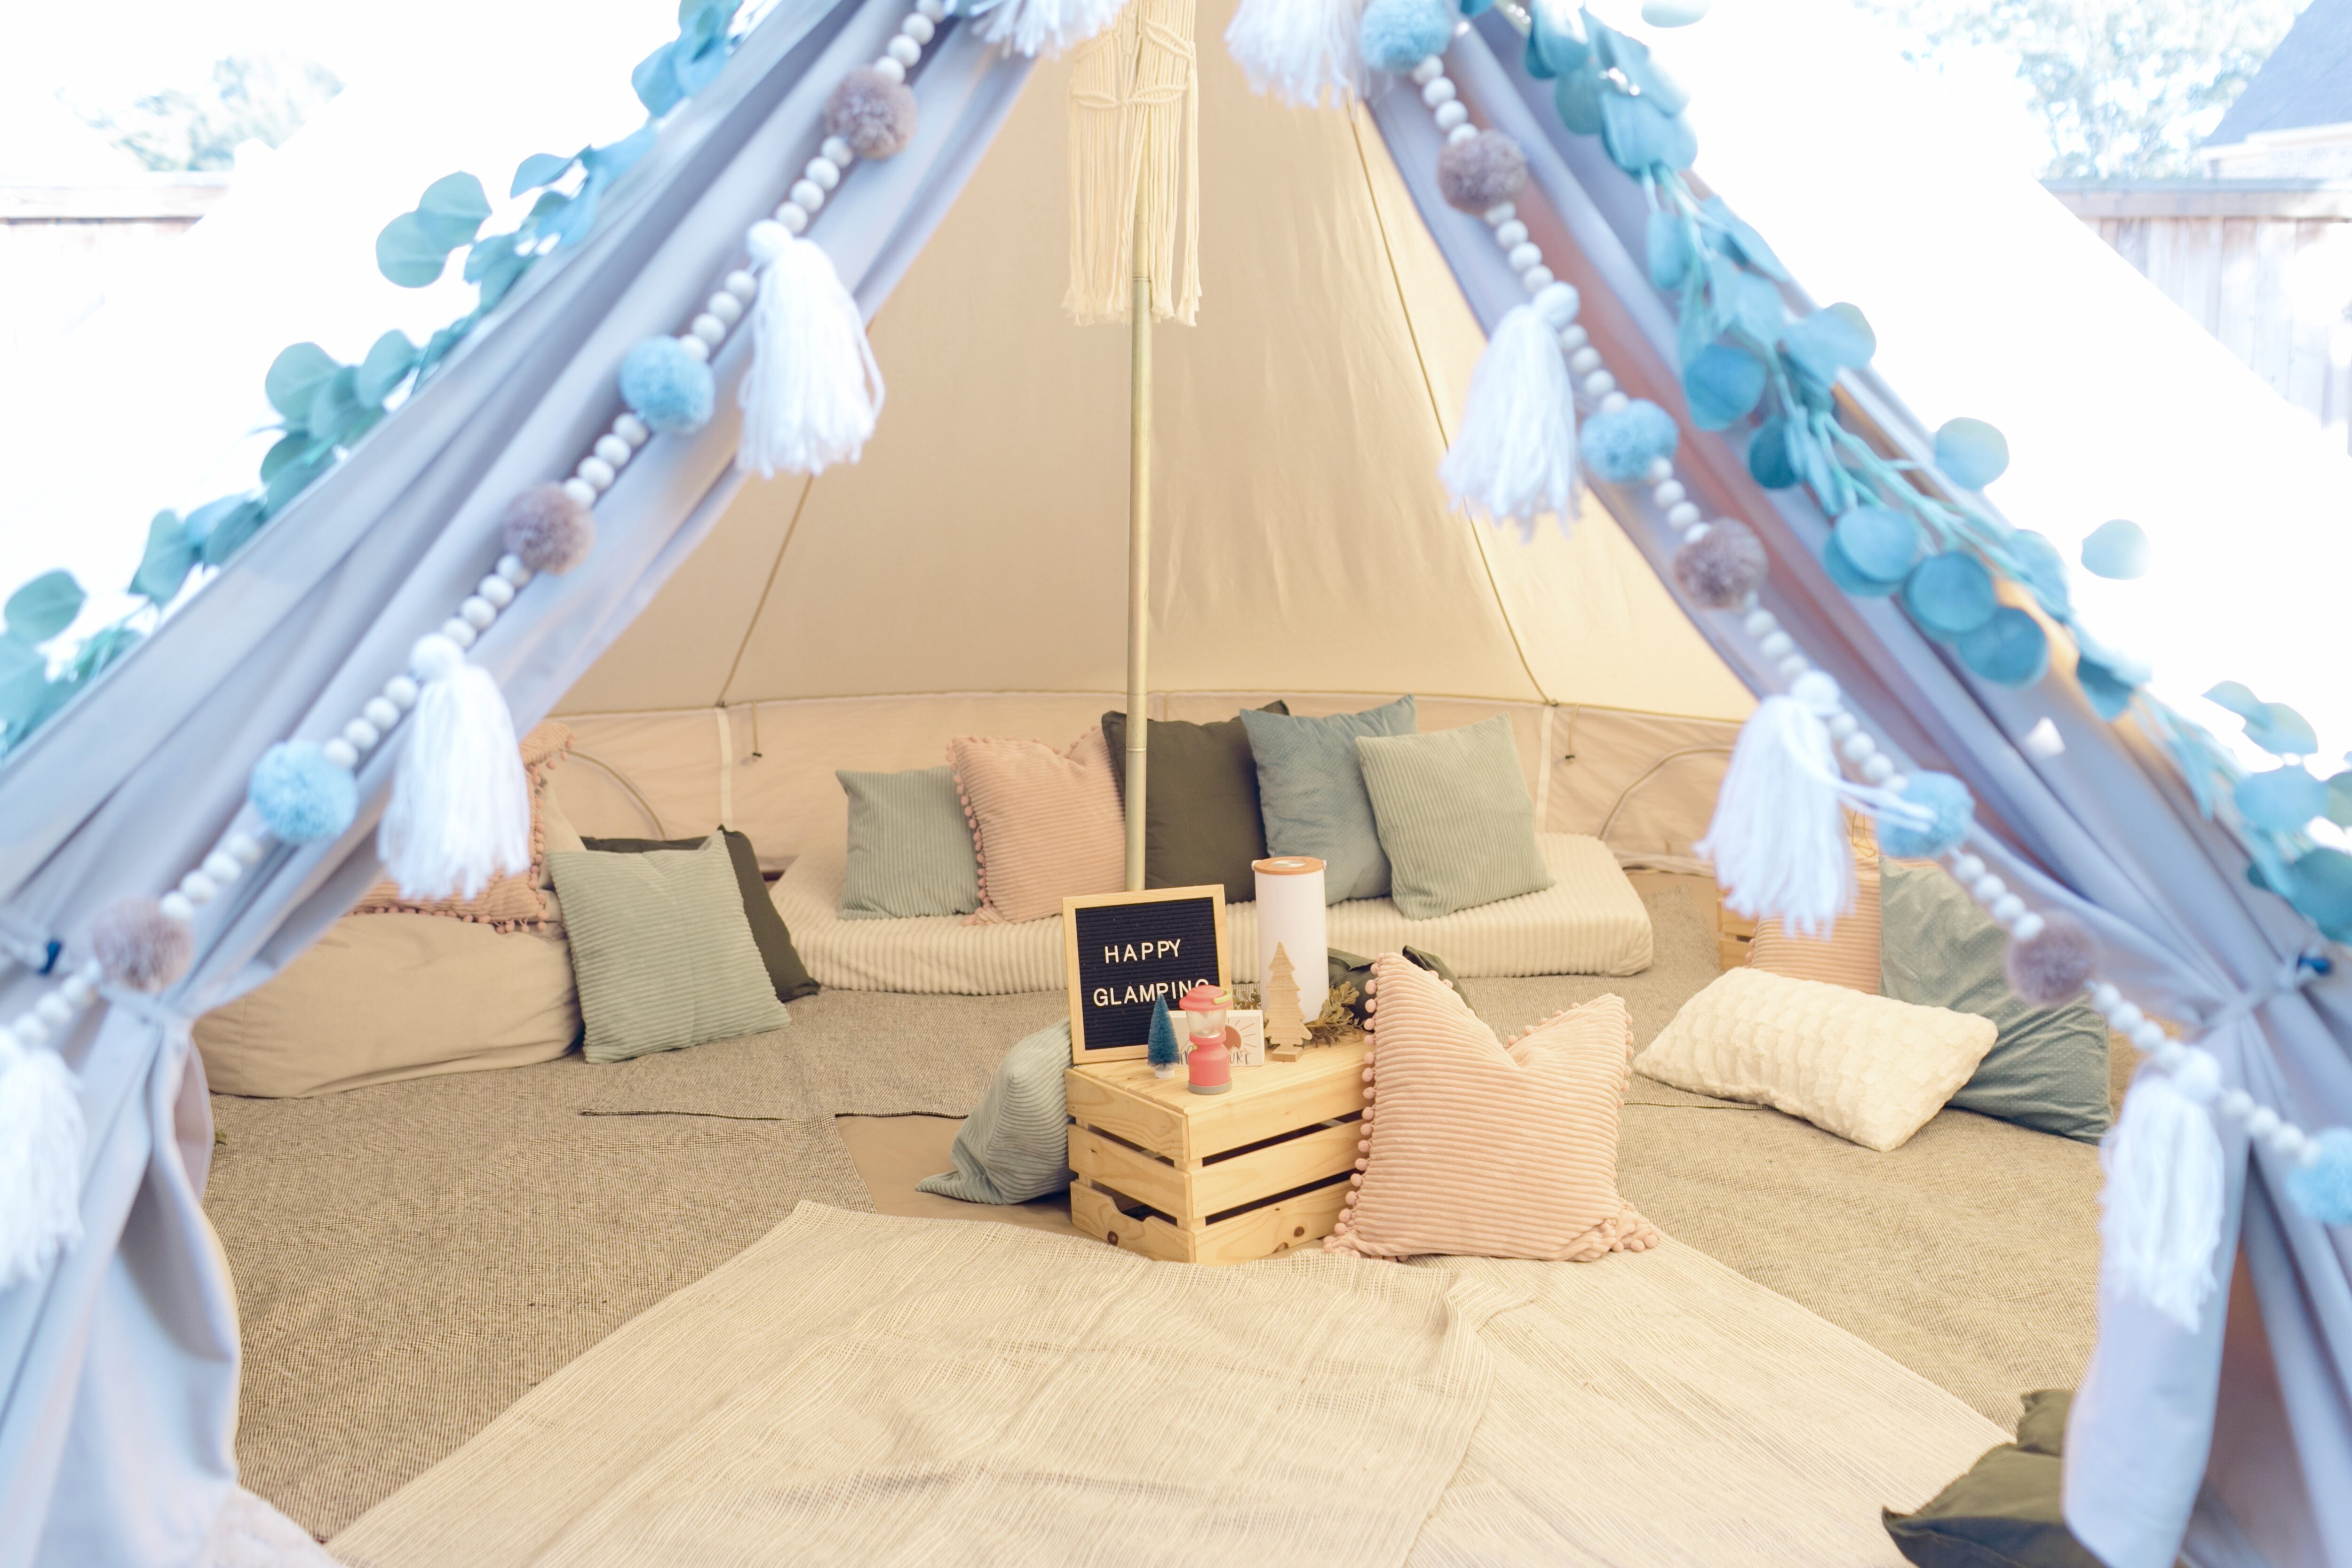 Glamping Birthday Party ideas featured by top US mommy blogger, Walking in Memphis in High Heels.